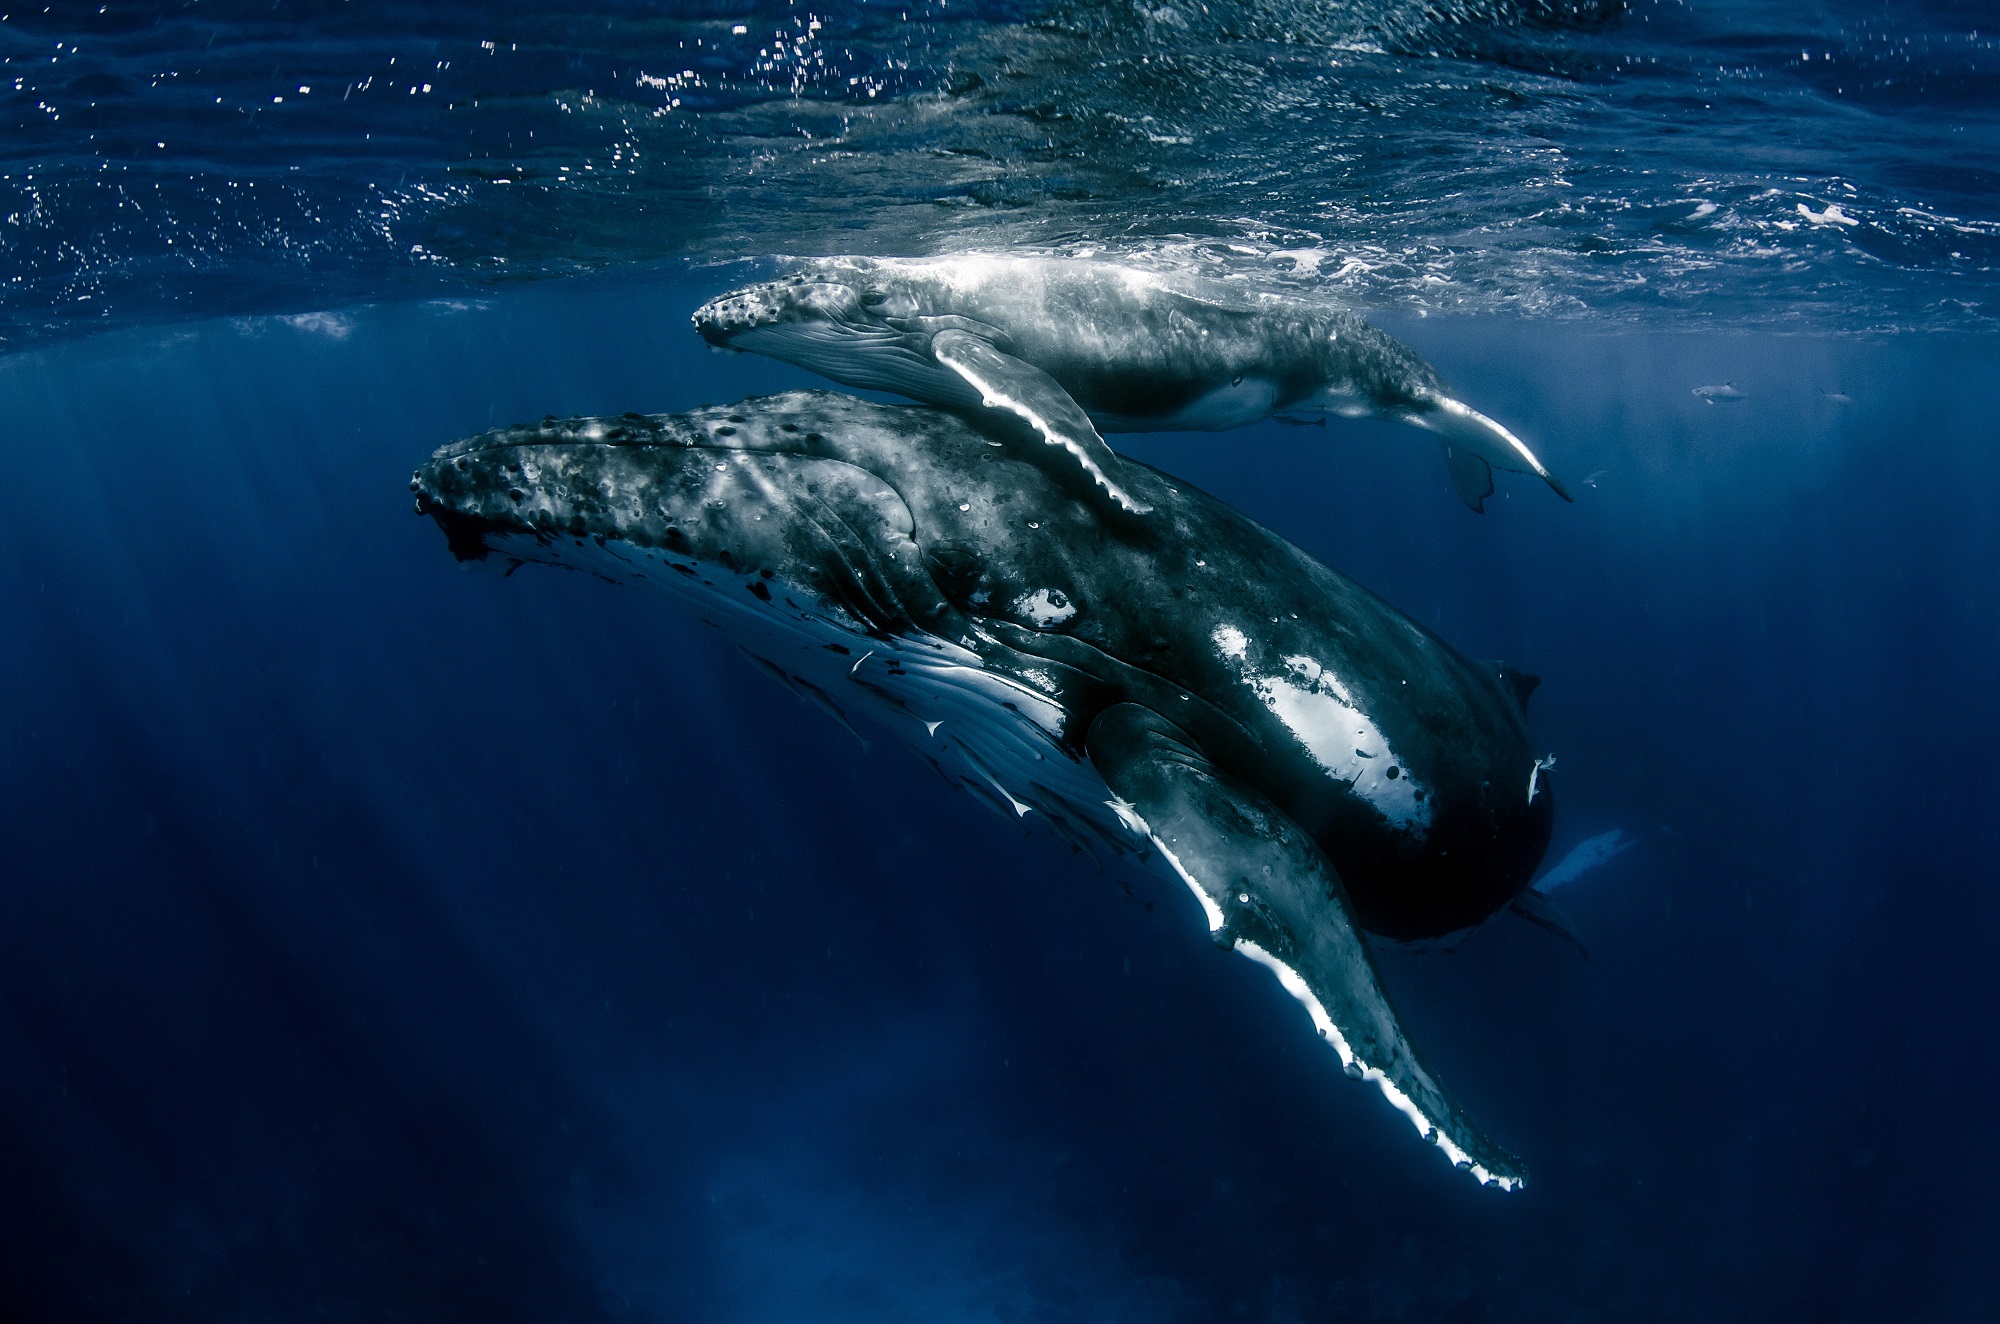 A humpback whale swimming with her calf, something lucky scuba divers might see when visiting Mexico in winter